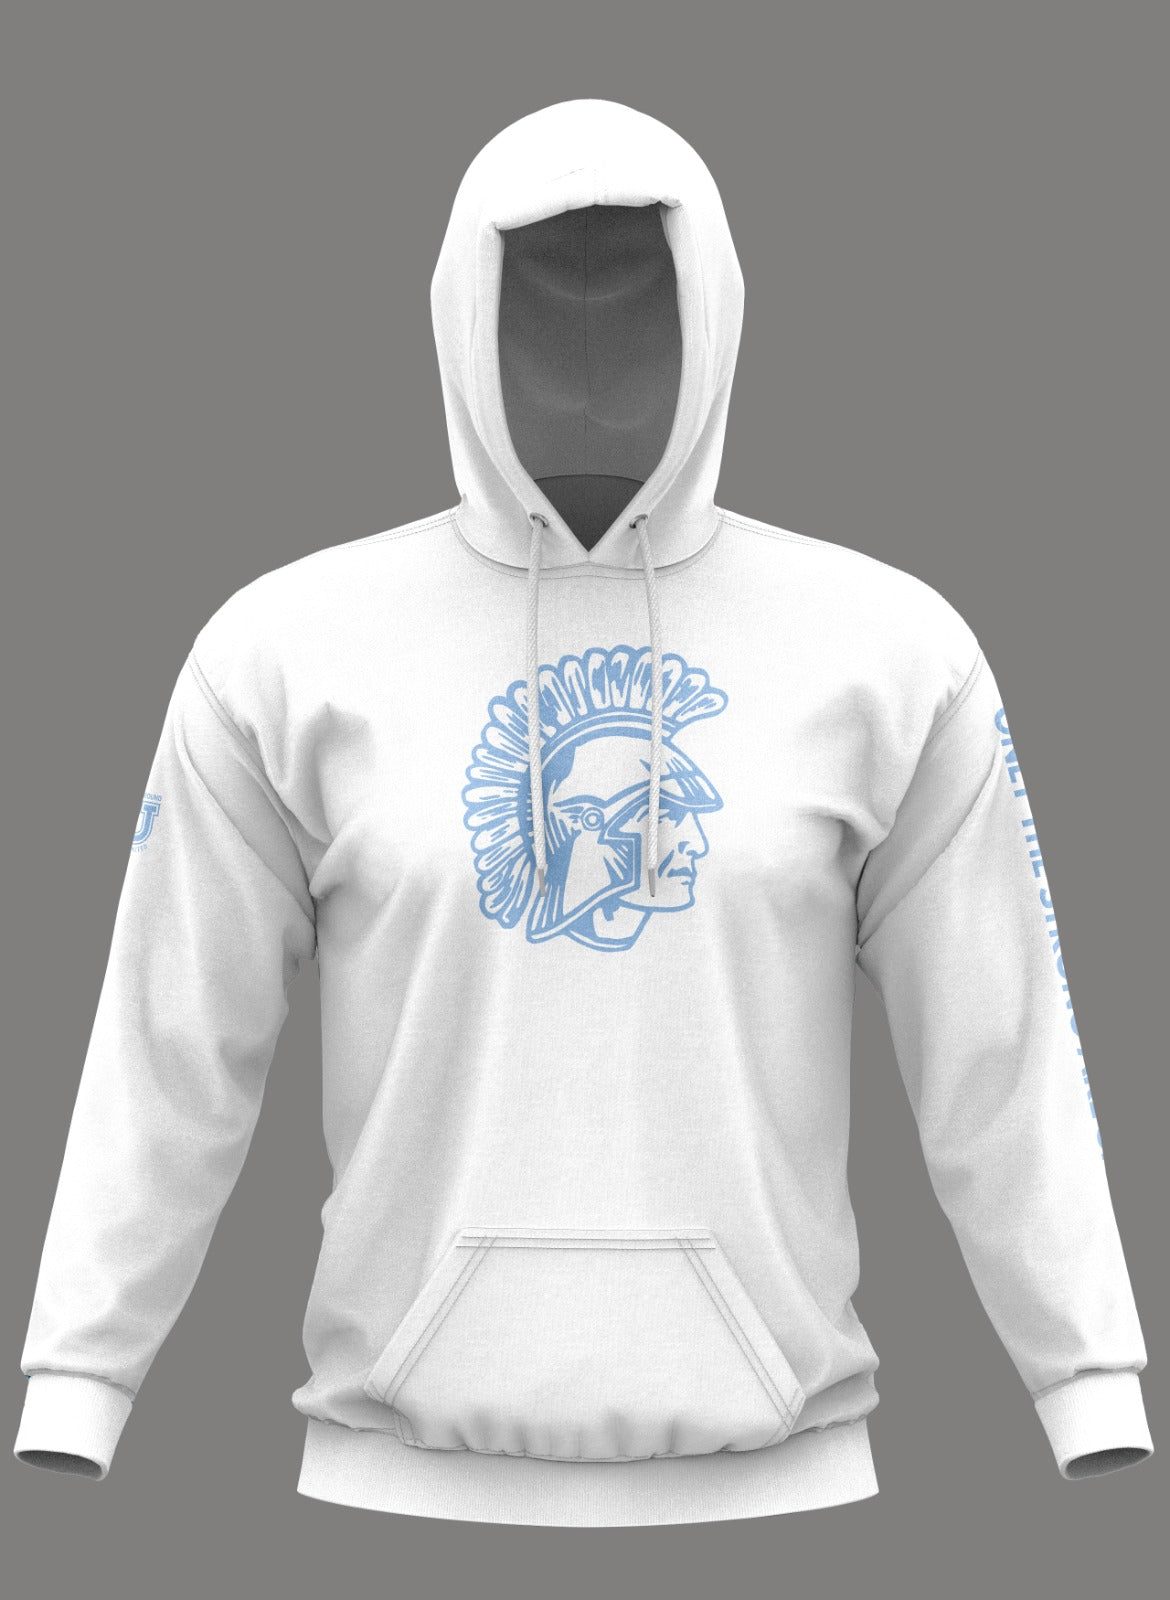 W.T. Chipman Performance Hoodie ~ Spartan White "Only the Strong are Spartans"